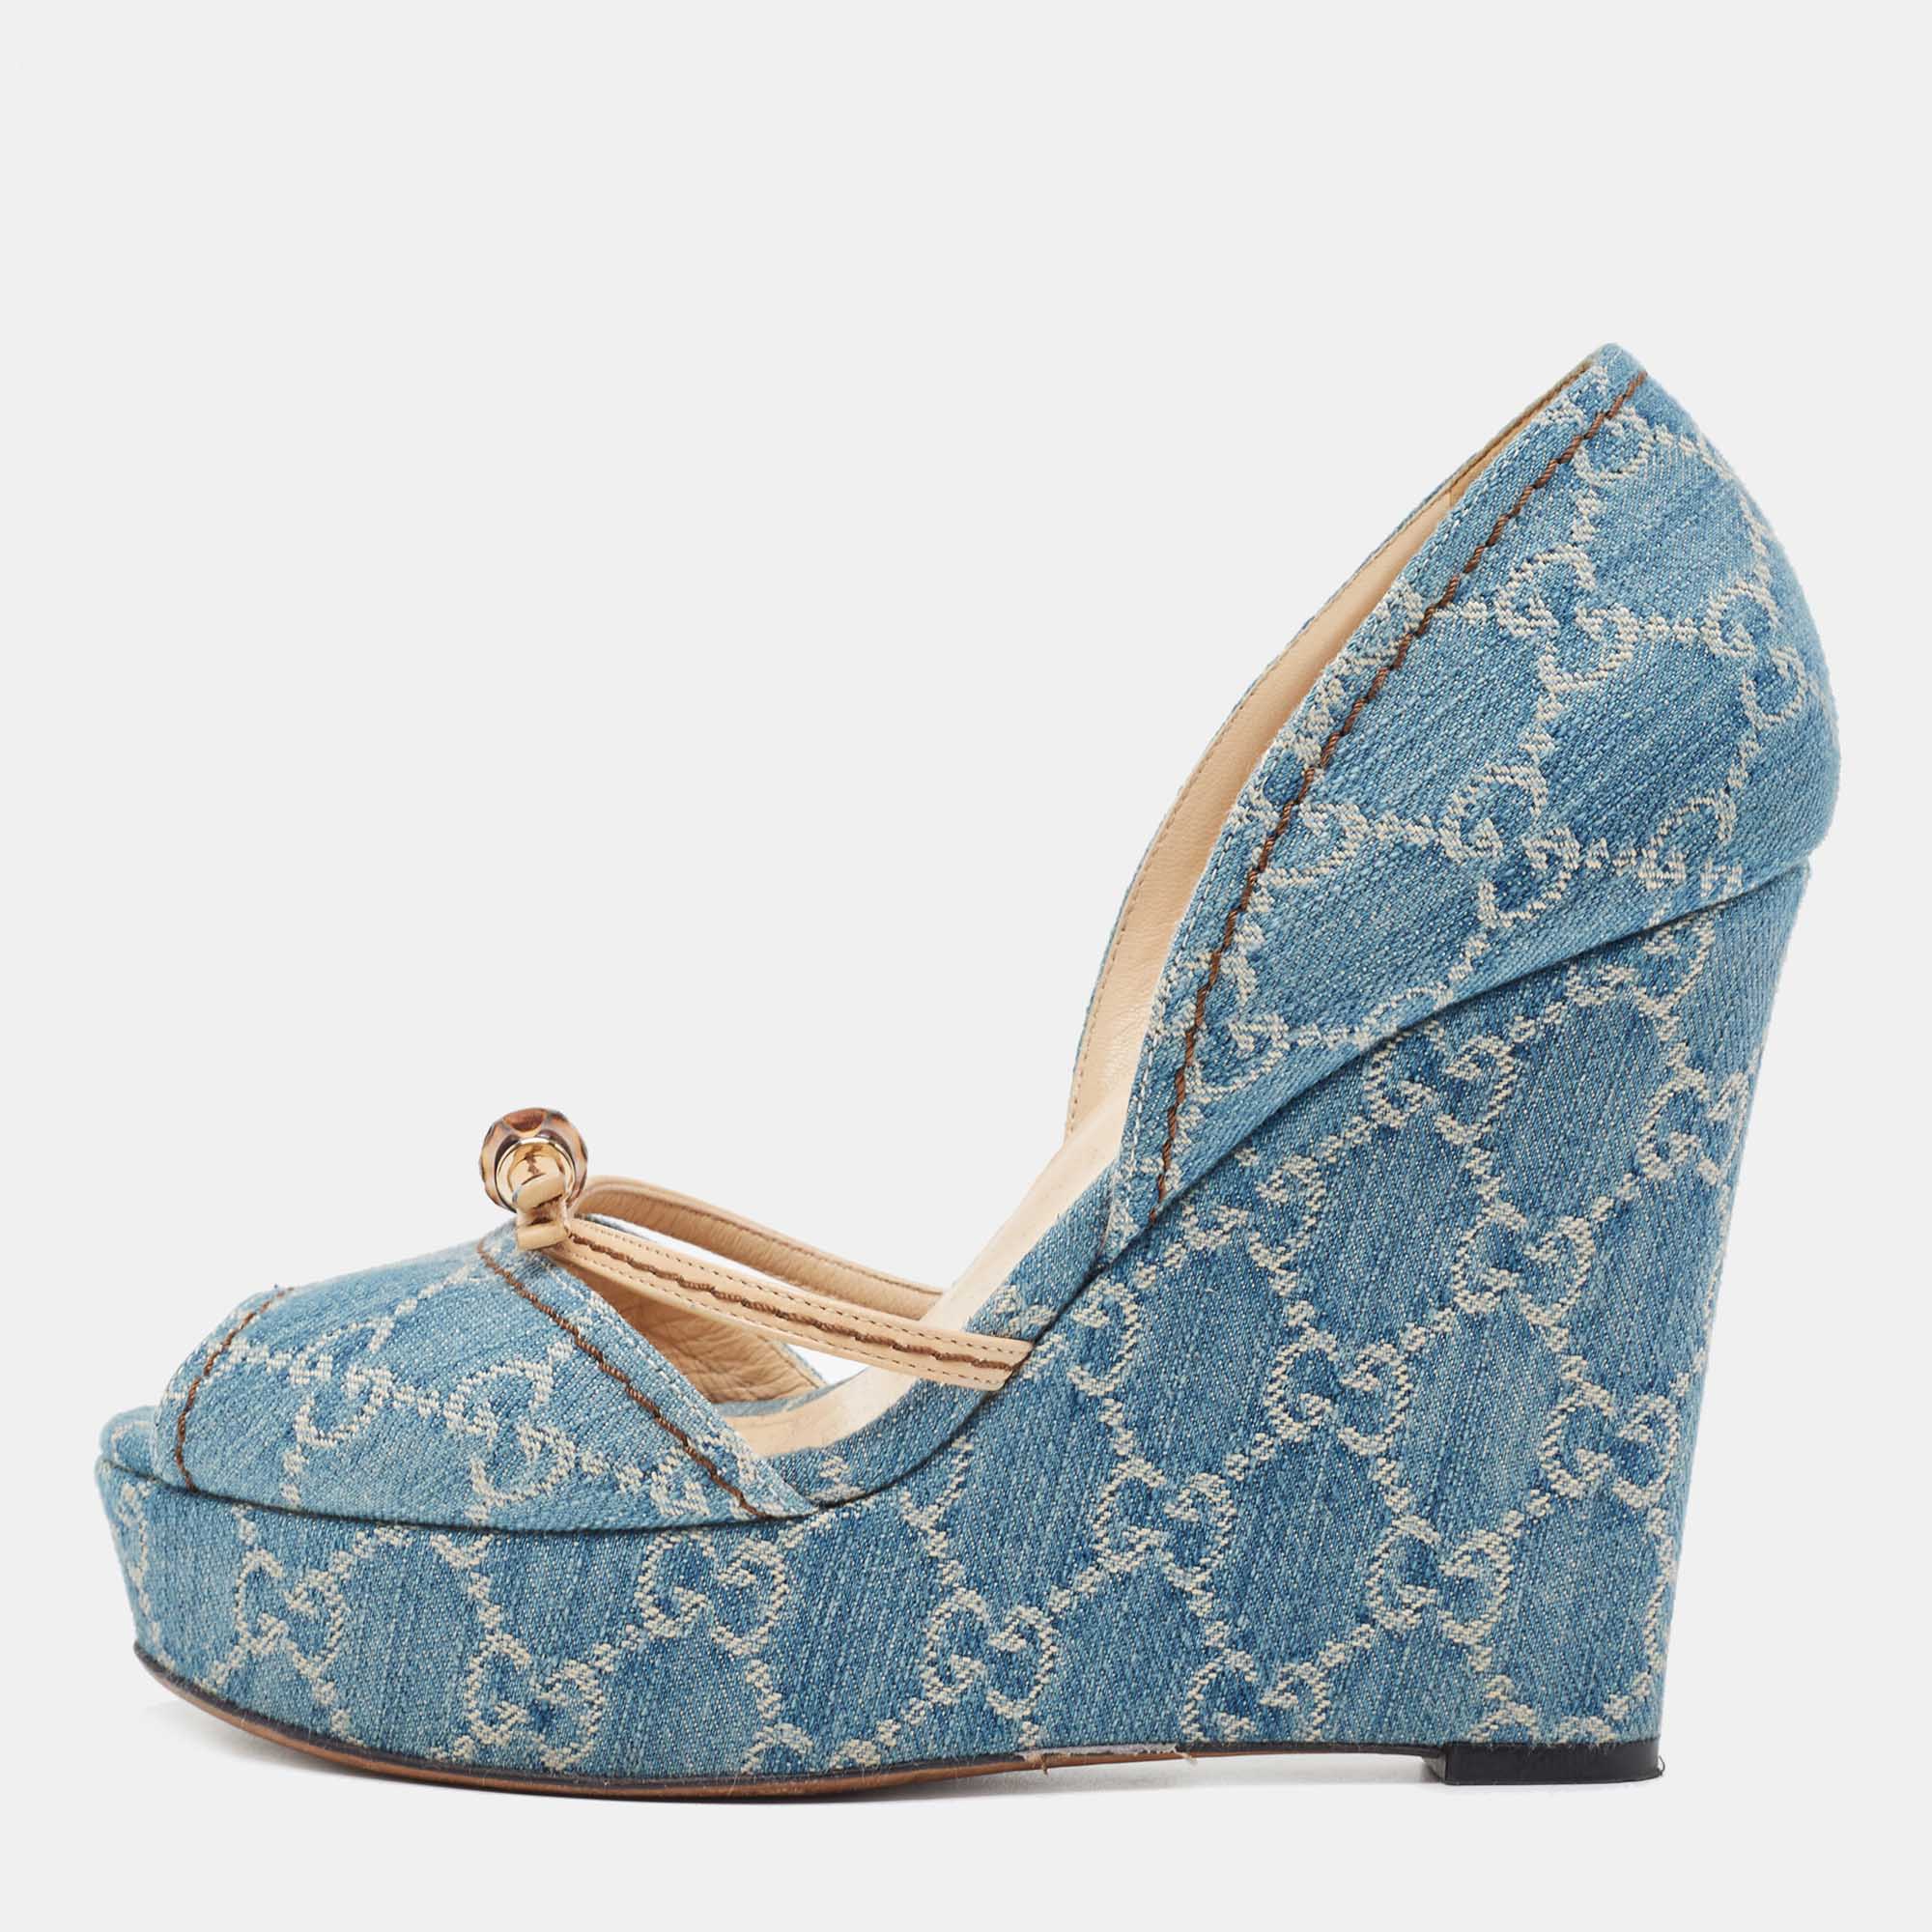 Gucci blue gg denim bamboo peep toe d'orsay wedge sandals size 38